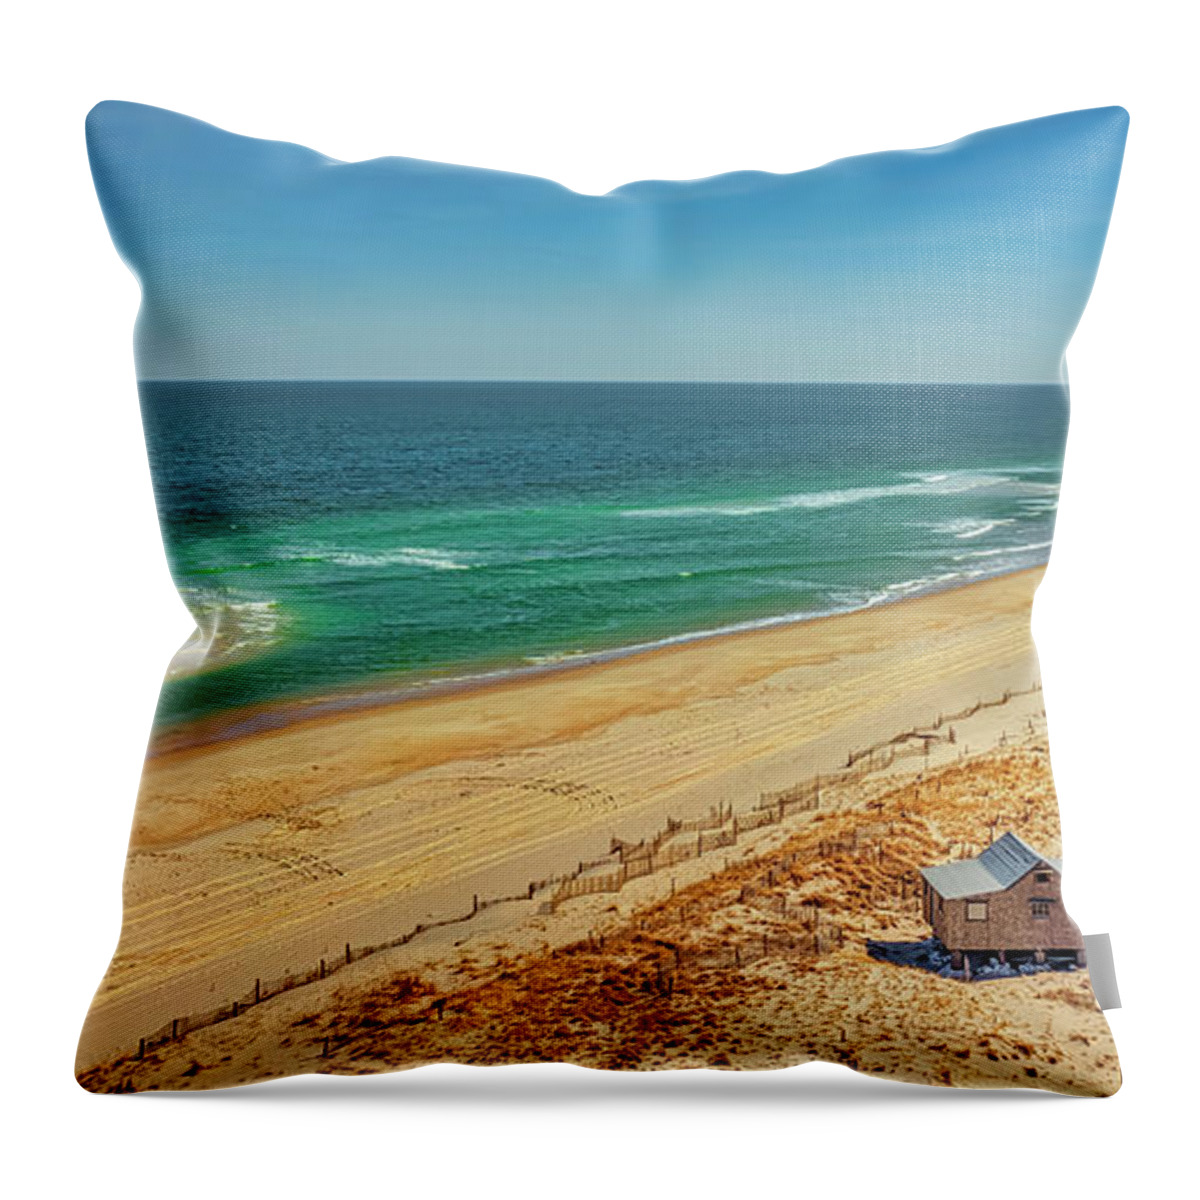 Judge's Shack Throw Pillow featuring the photograph Judges Shack New Jersey Shore by Susan Candelario